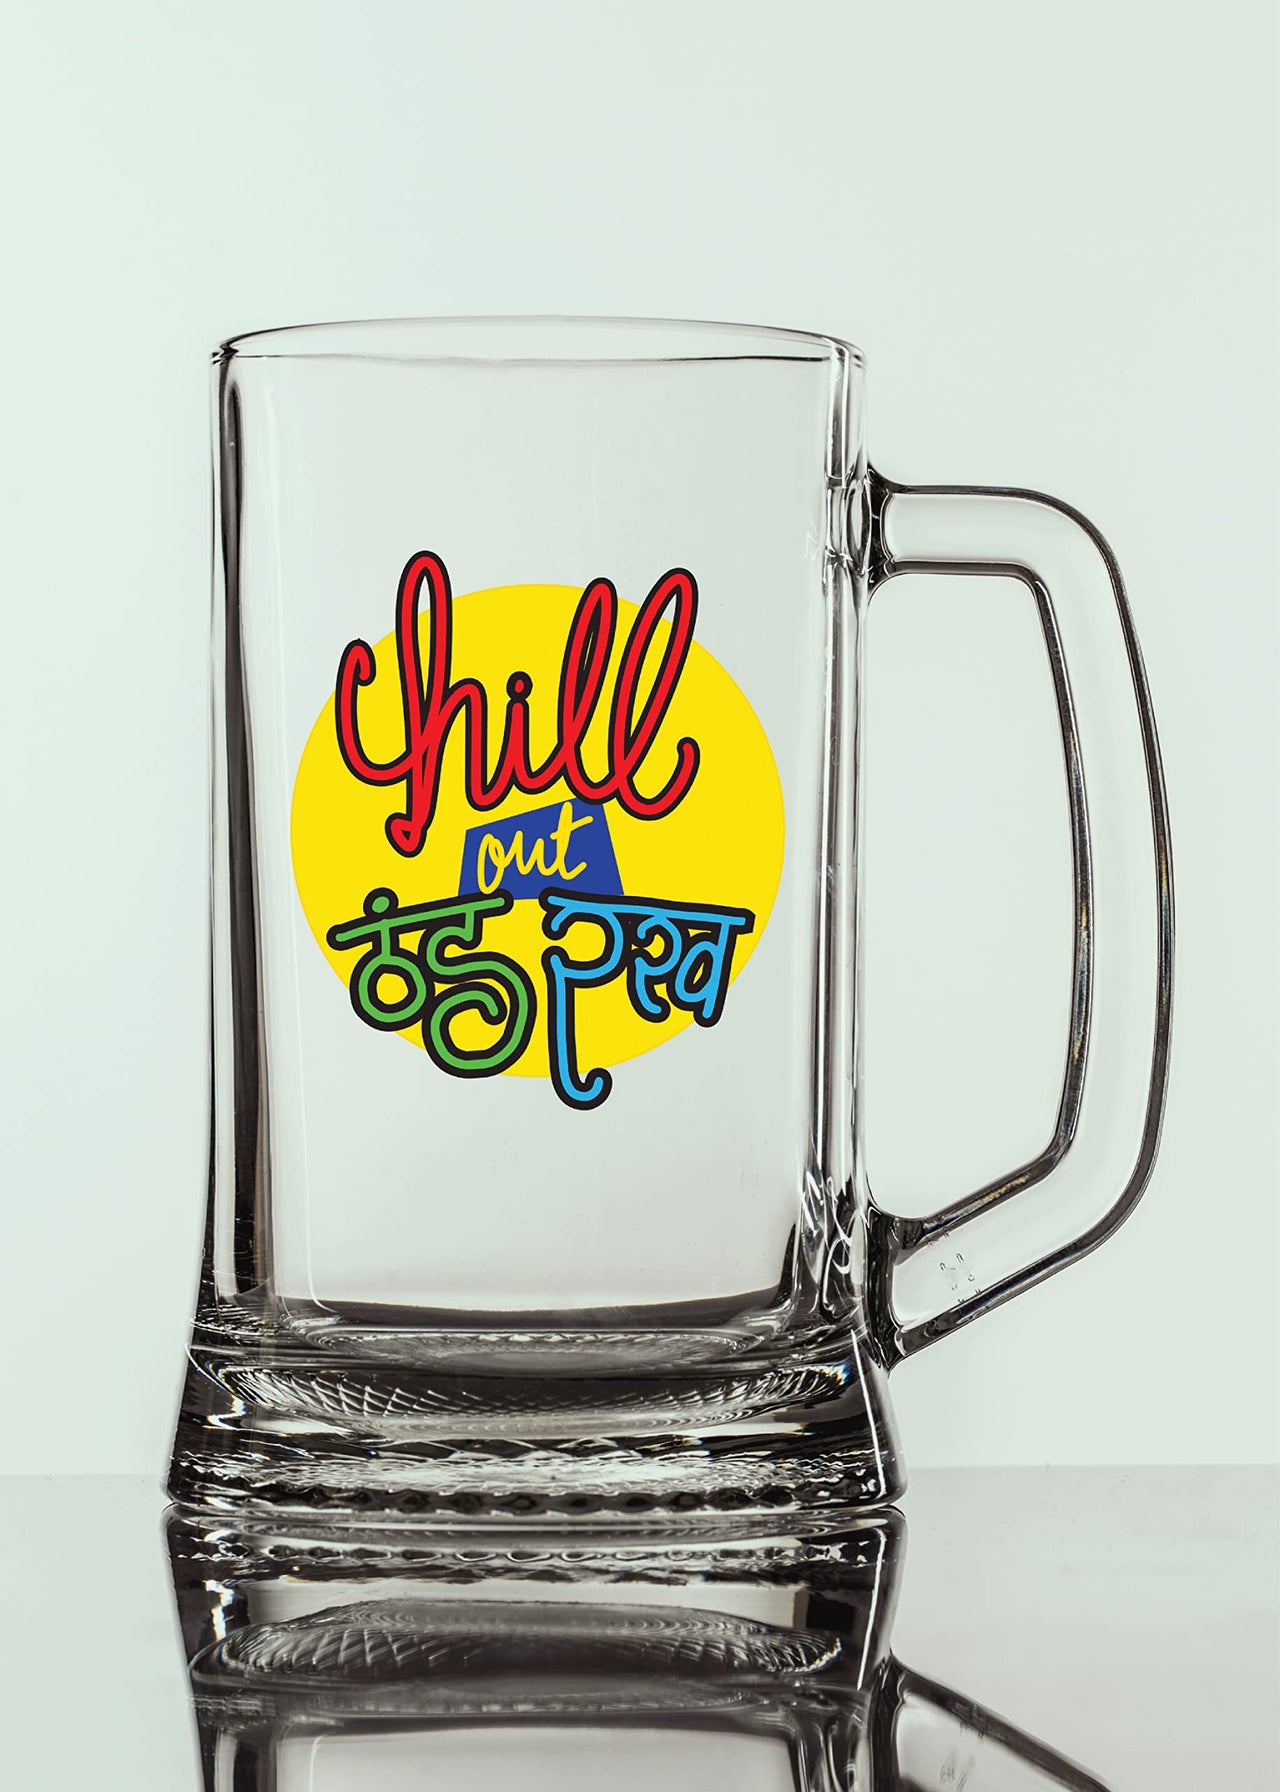 Chill Out - Beer Mug - 1 Piece, Clear, 500 ml - Transparent Glass Beer Mug -Printed Beer Mug with Handle Gift for Men, Dad, Brother, Wife, Girlfriend